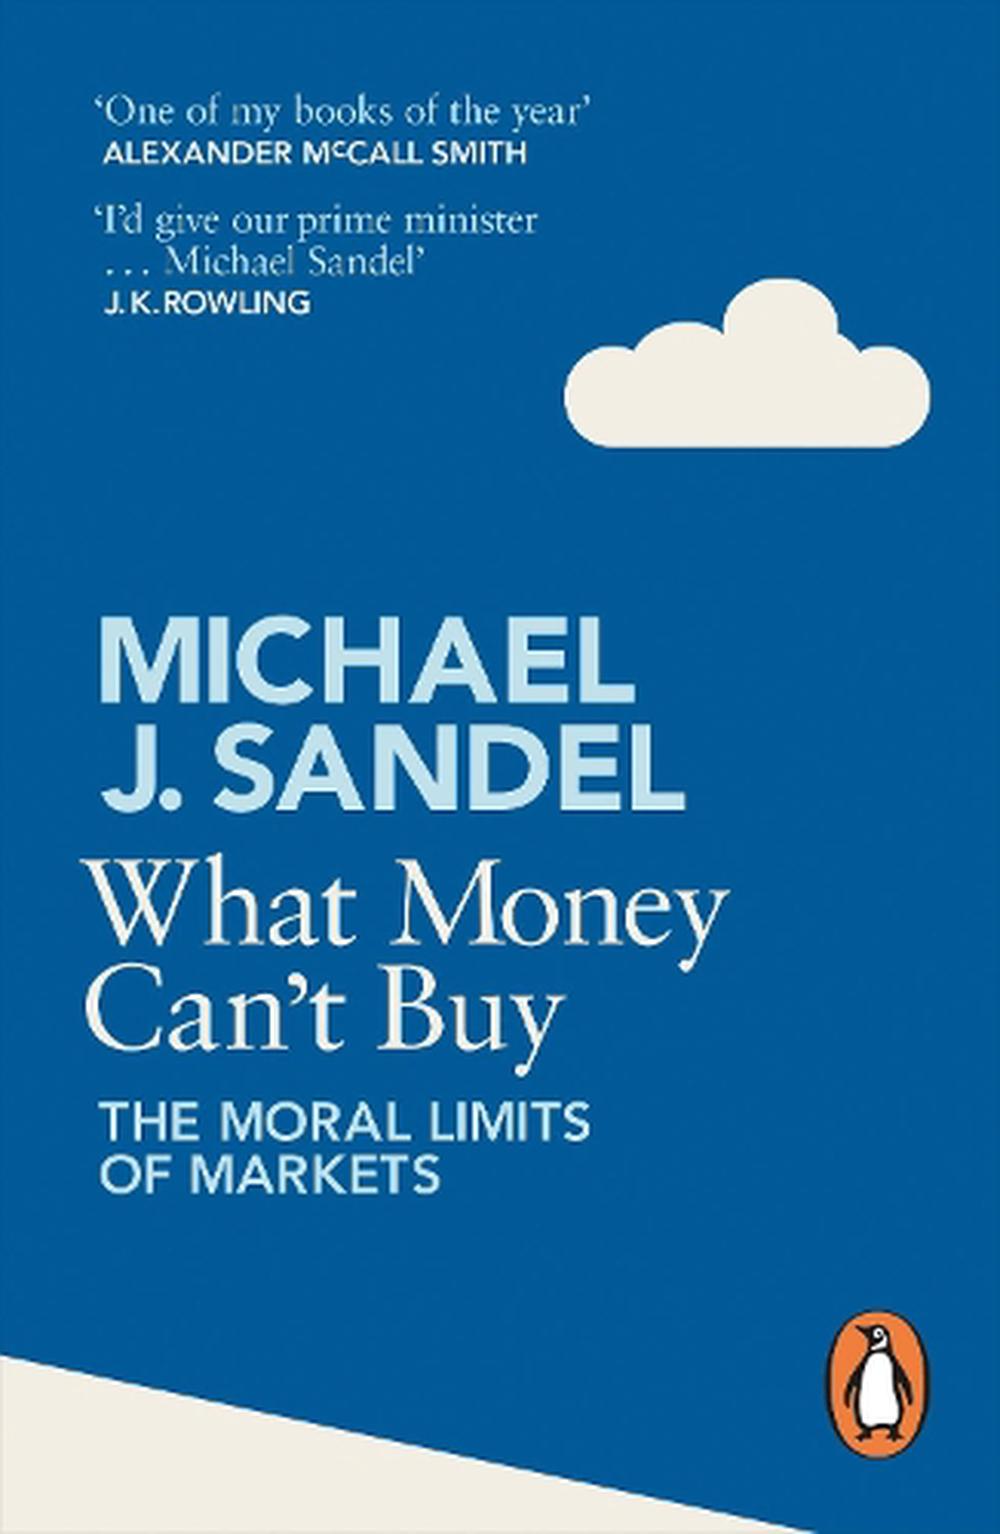 What Money Can't Buy by Michael J Sandel, Paperback, 9780241954485 ...